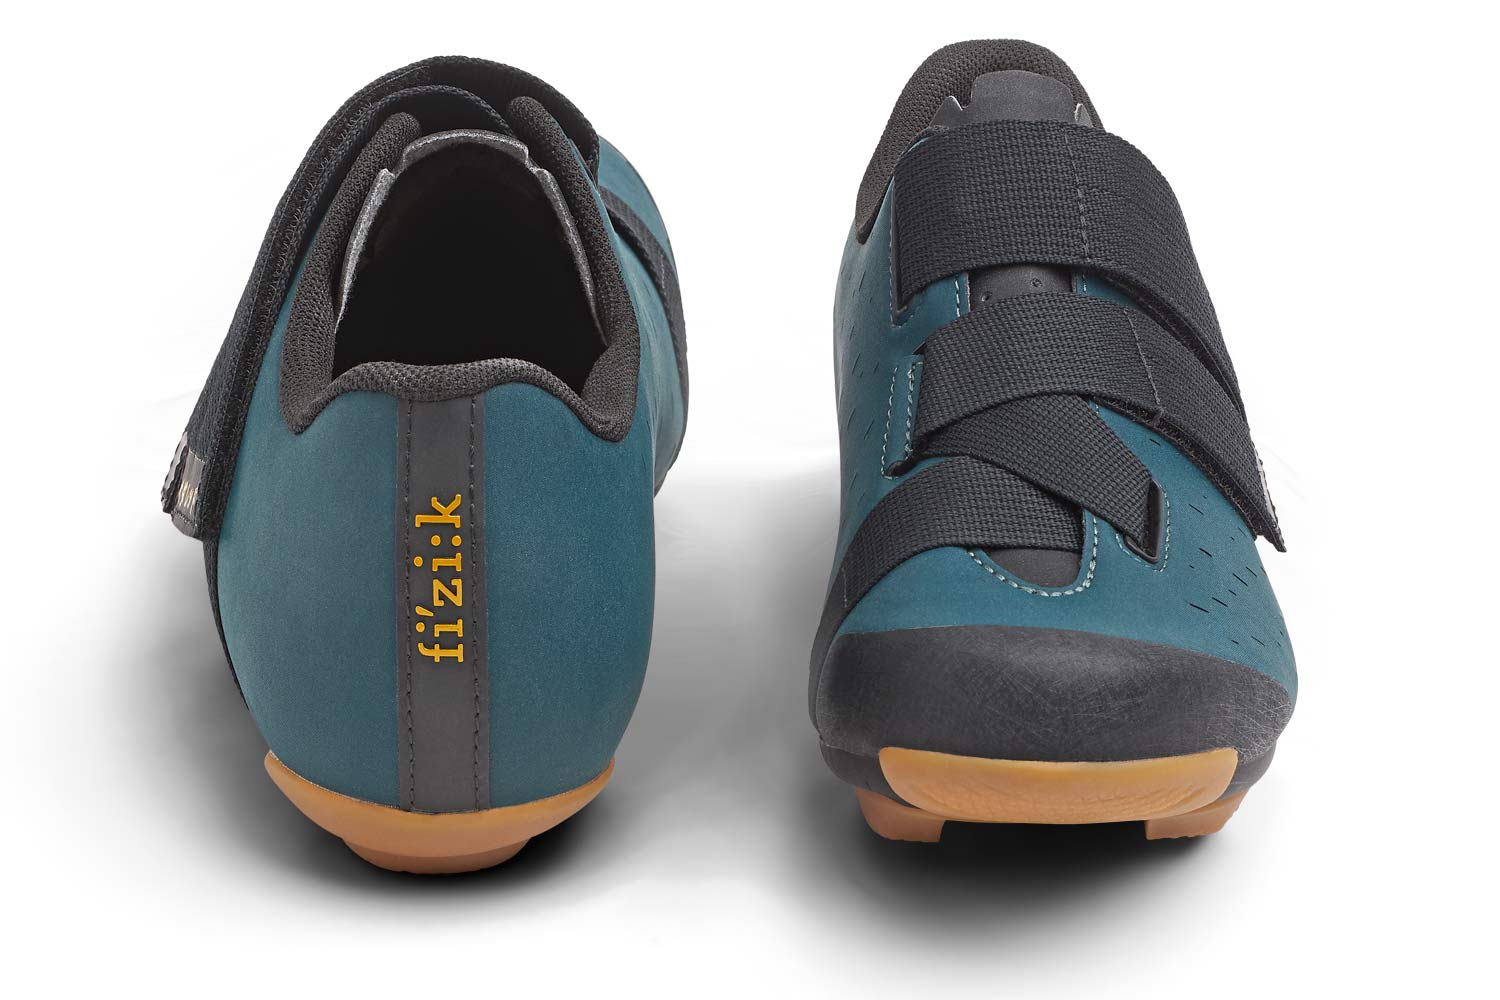 PEdALED Jary Terra gravel shoes, special edition Fizik Terra Powerstrap X4 gravel bike shoes